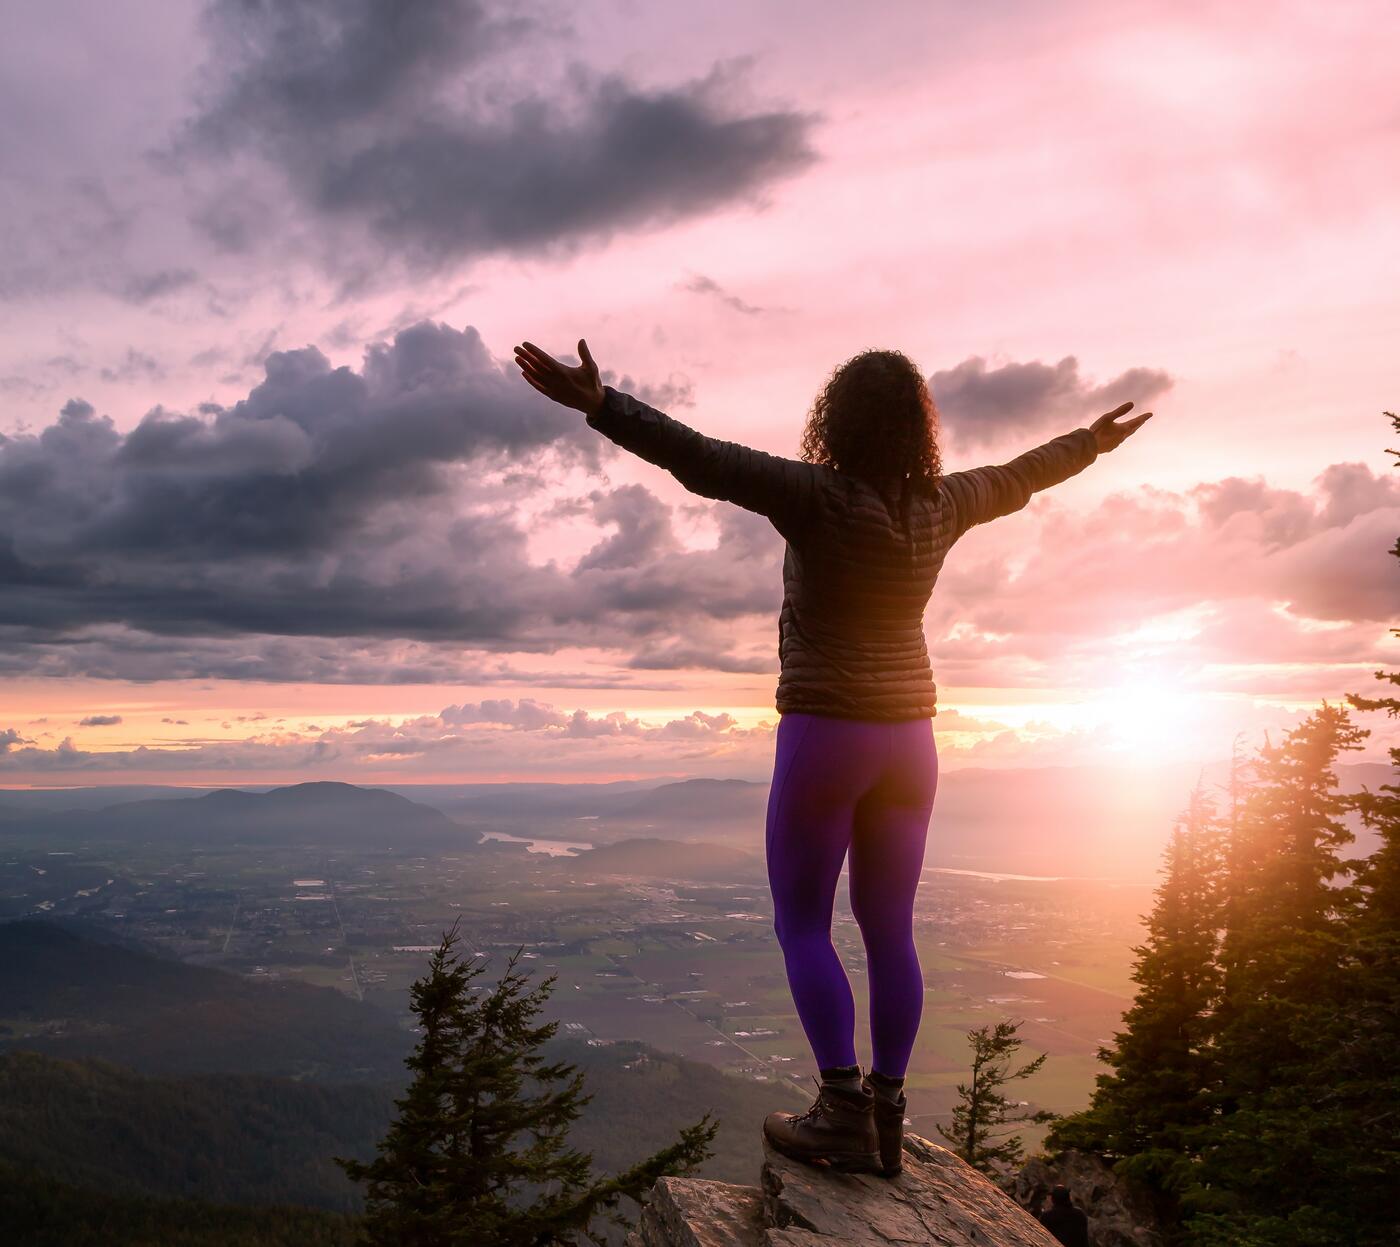 Woman standing on edge of a cliff as the sun rises, her arms are spread out in welcoming of the new day.